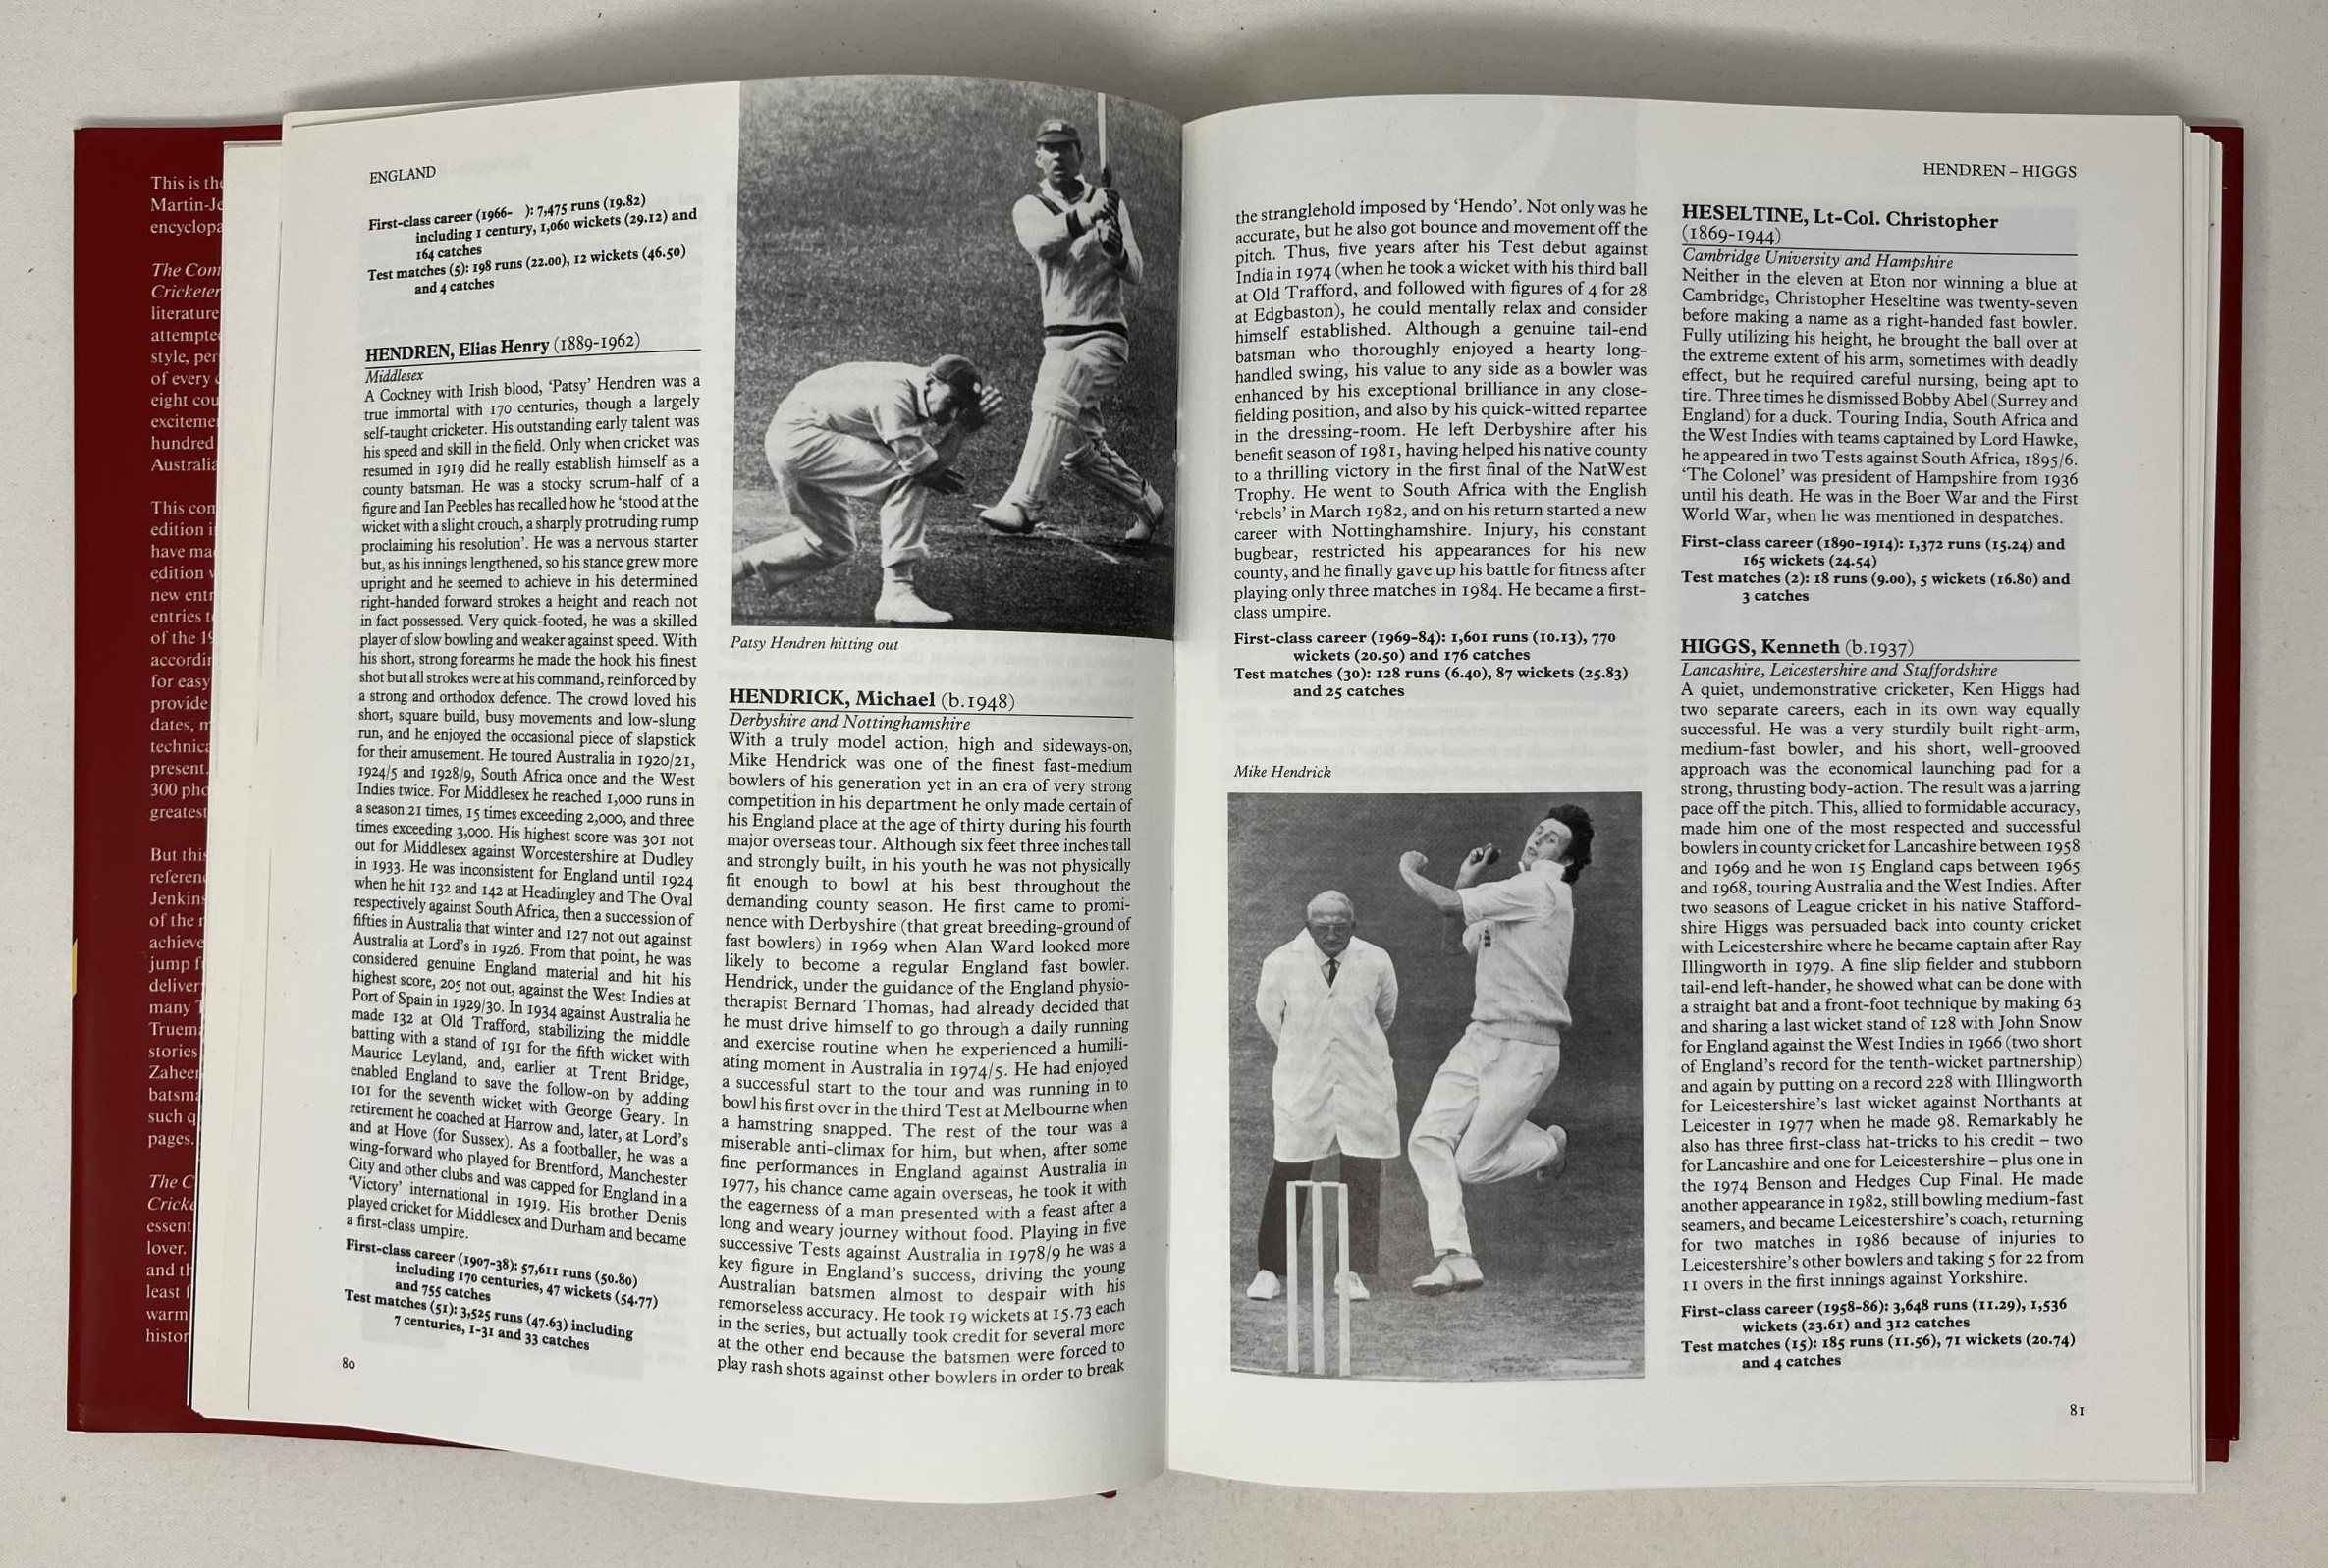 Martin-Jenkins (Christopher), The Complete Whose Who Of Test Cricketers, and assorted other books on - Image 2 of 8